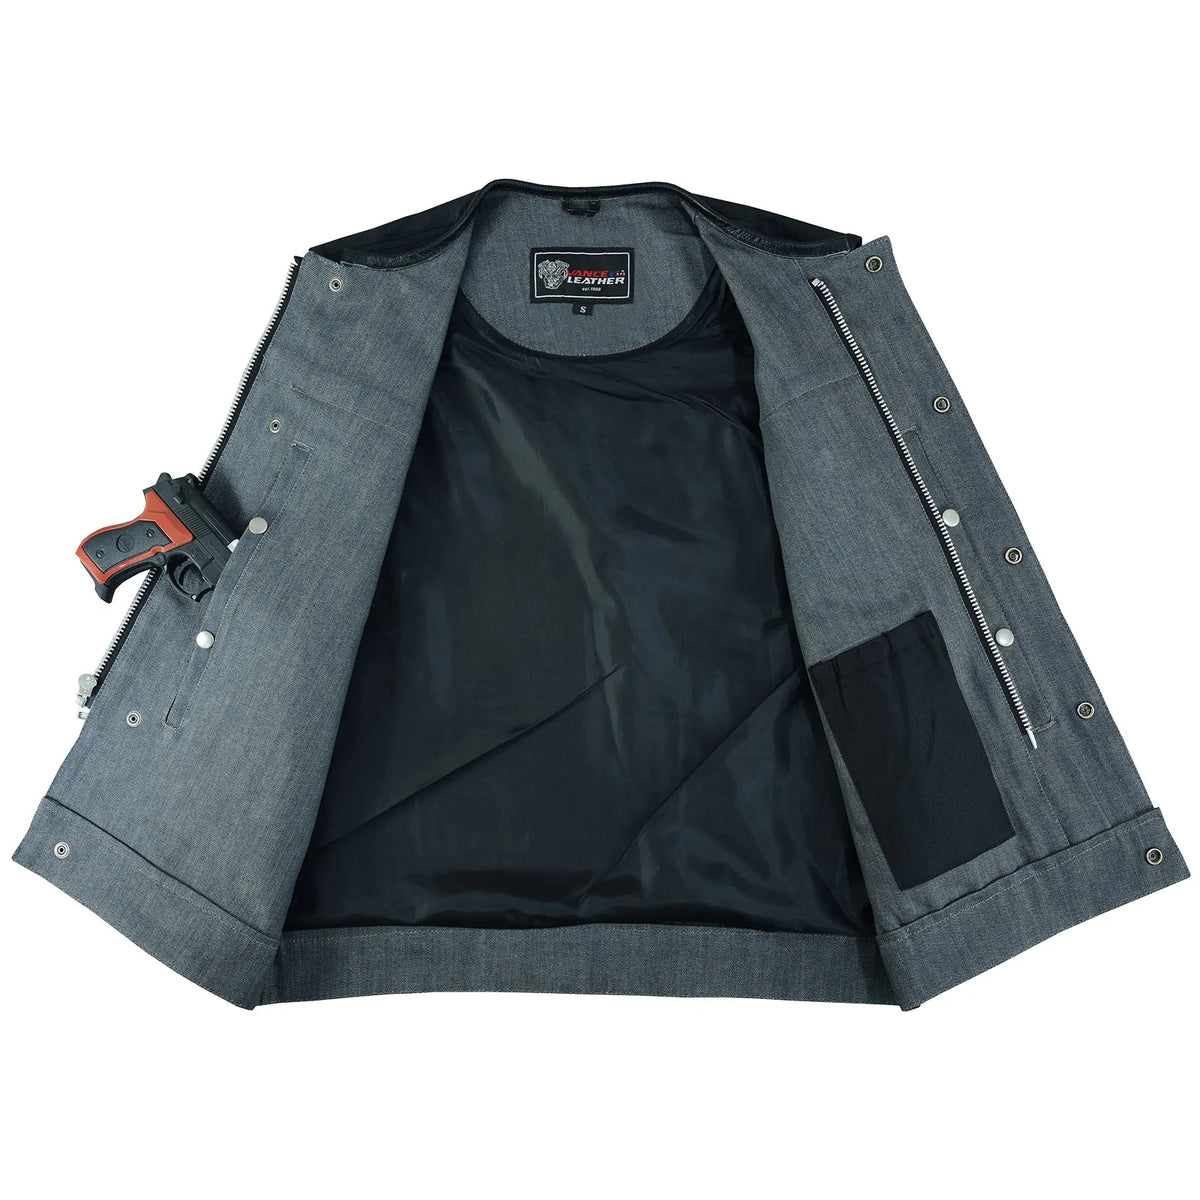 Men's Grey Denim & Leather Motorcycle Vest with CCW Pockets